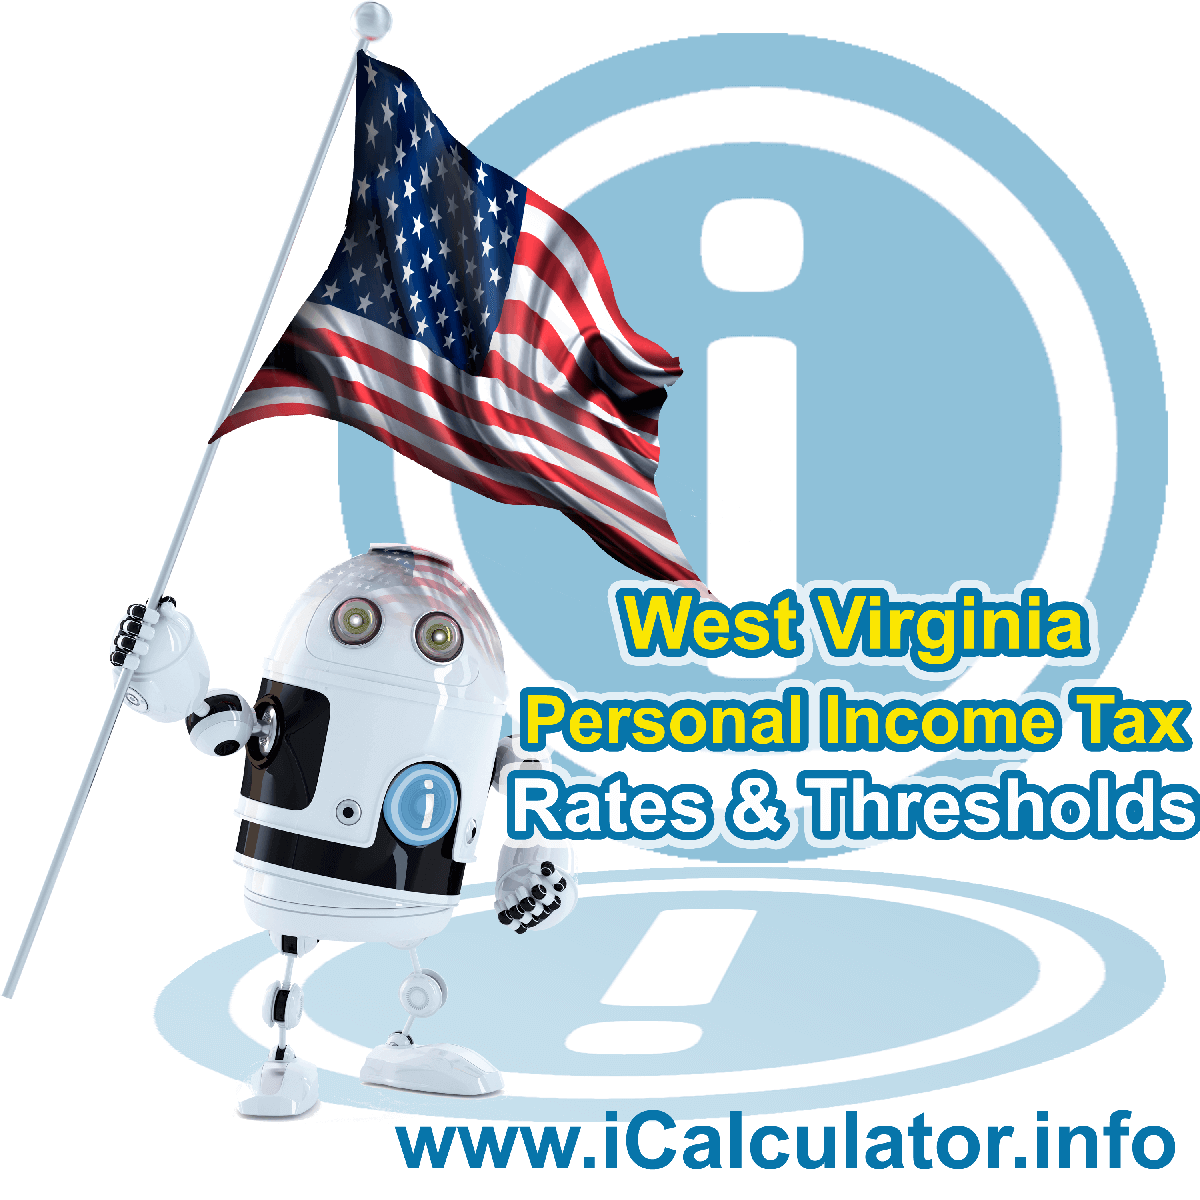 West Virginia State Tax Tables 2022. This image displays details of the West Virginia State Tax Tables for the 2022 tax return year which is provided in support of the 2022 US Tax Calculator